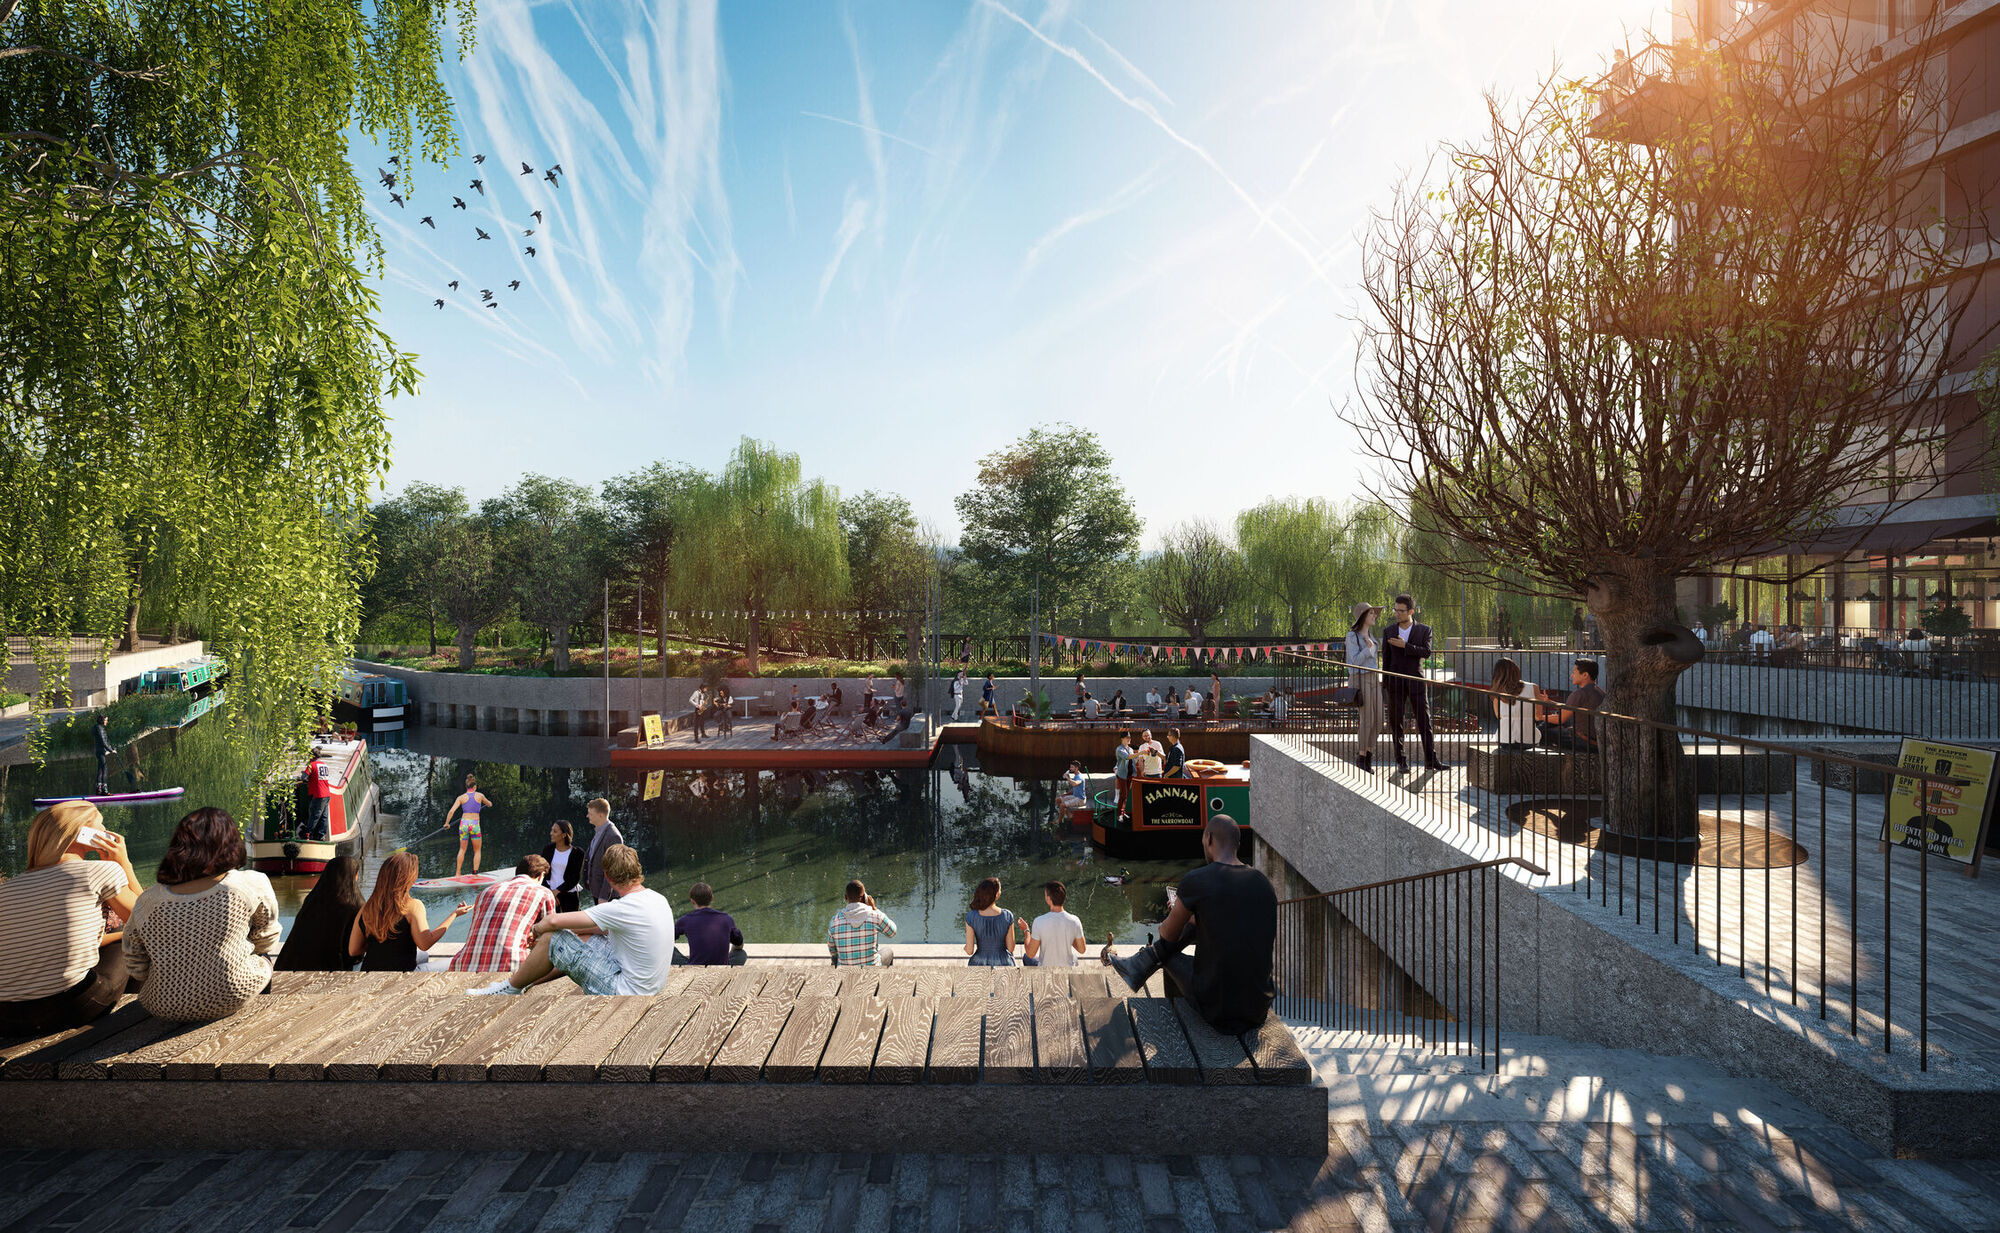 Landscape architects Grant Associates appointed to The Brentford Project